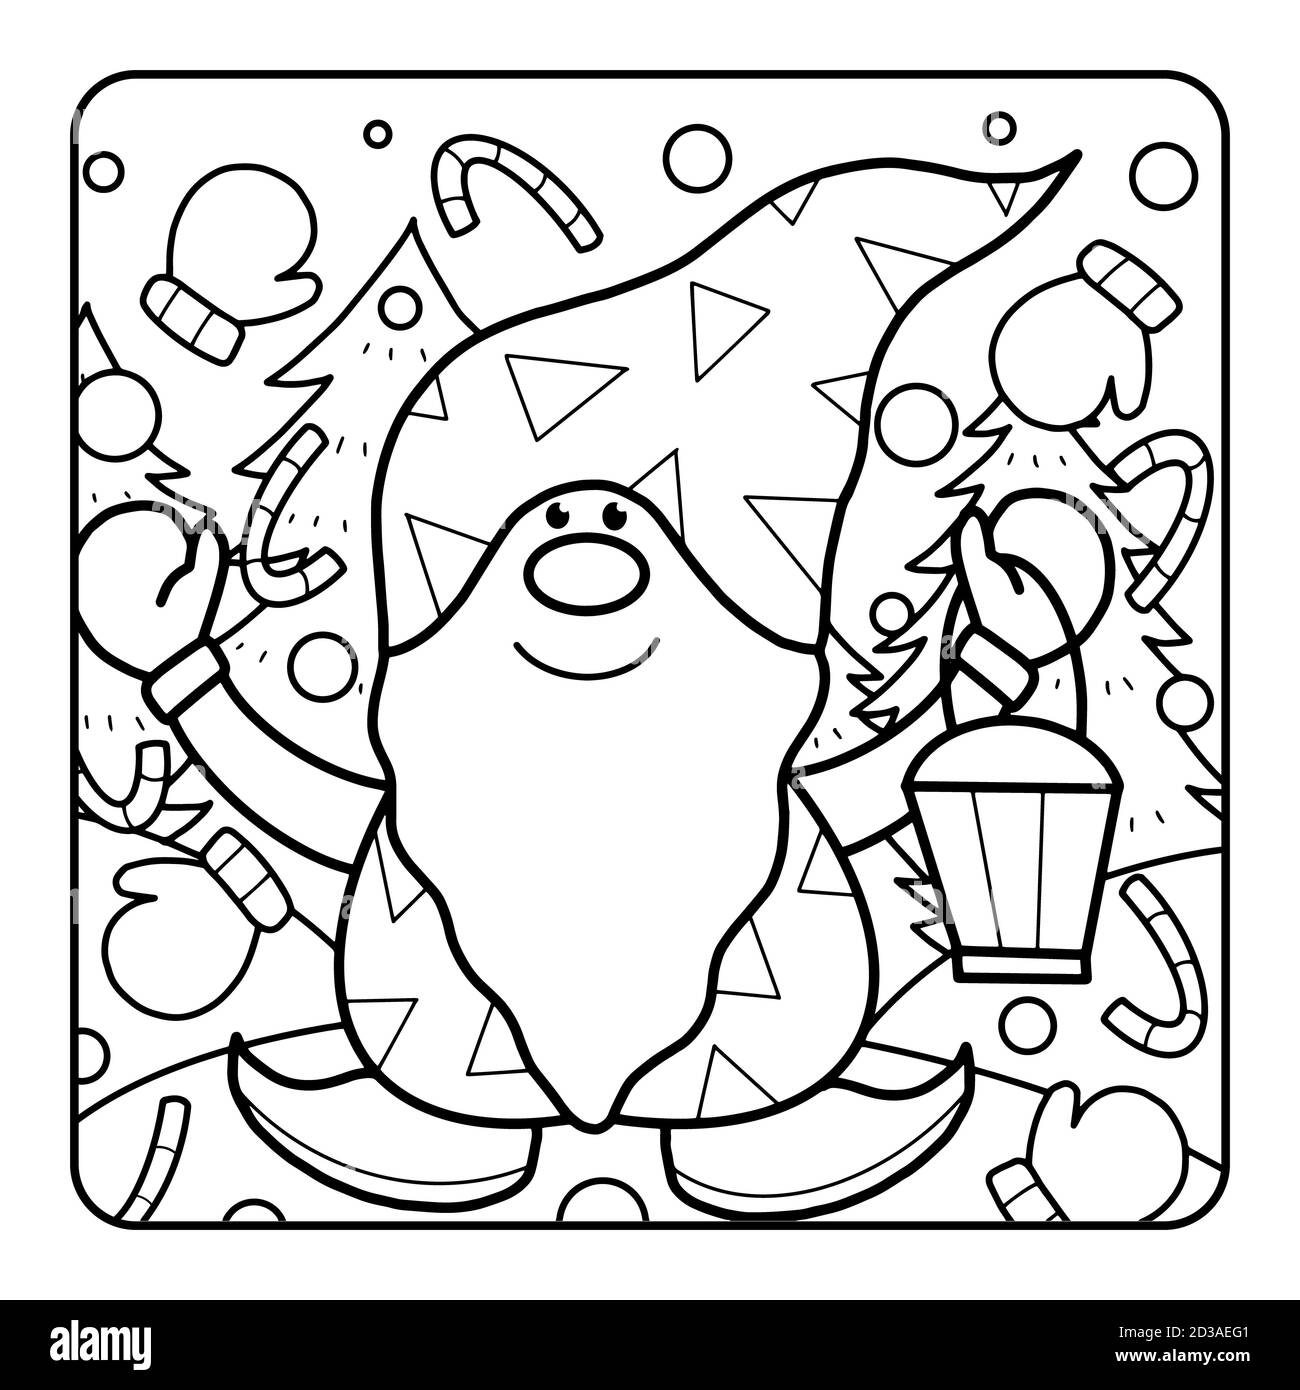 Christmas coloring page for kids Stock Photo - Alamy